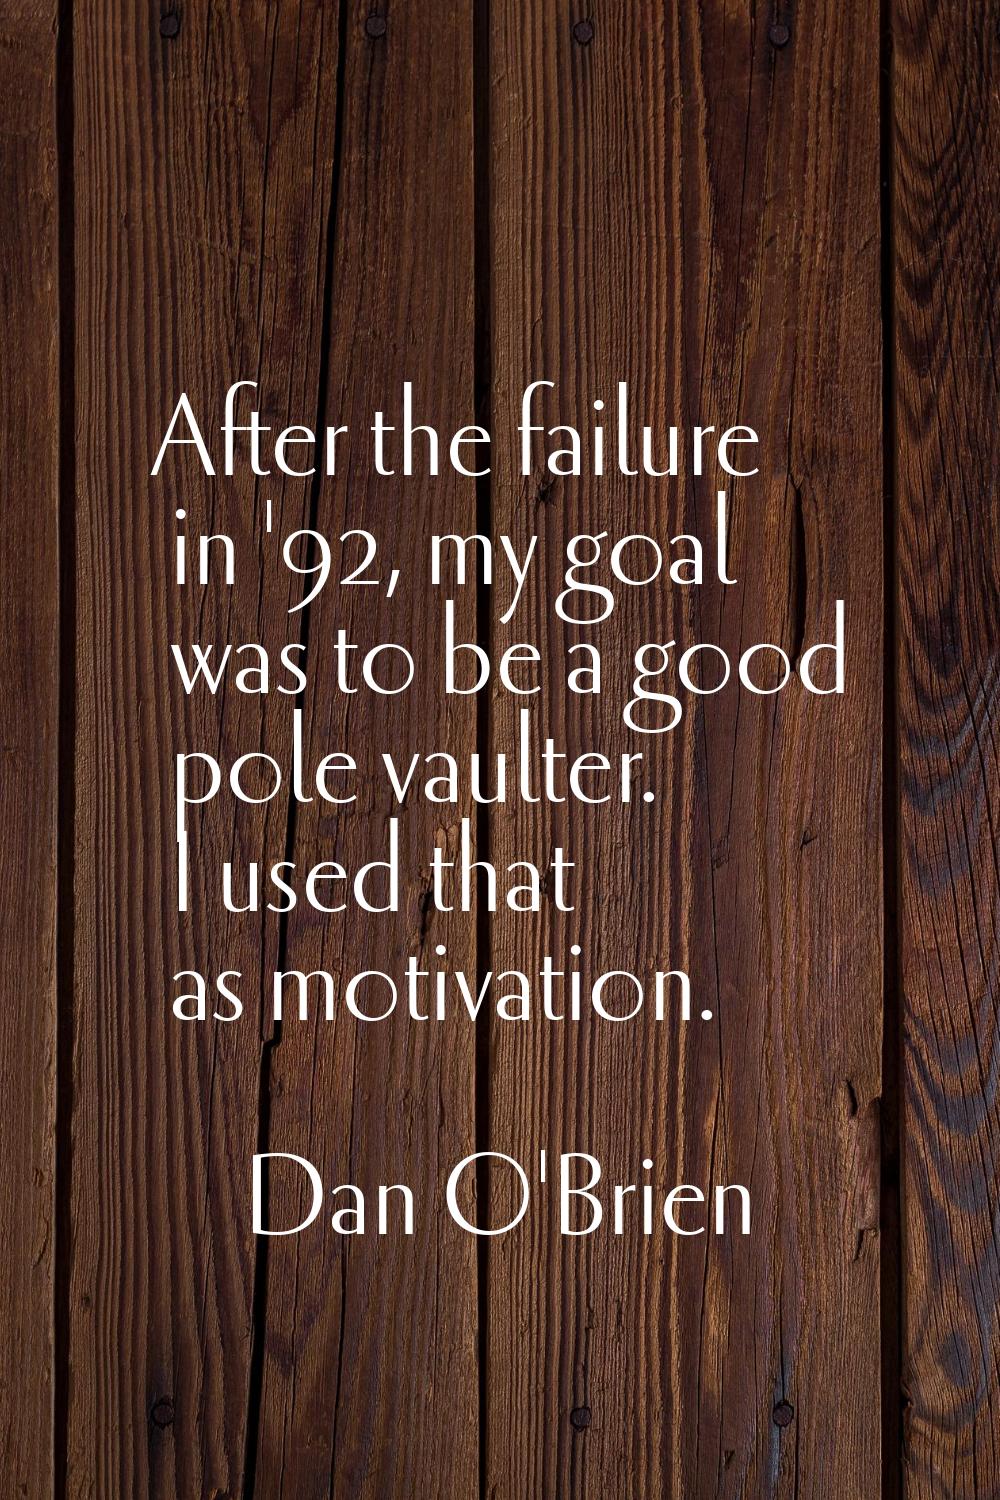 After the failure in '92, my goal was to be a good pole vaulter. I used that as motivation.